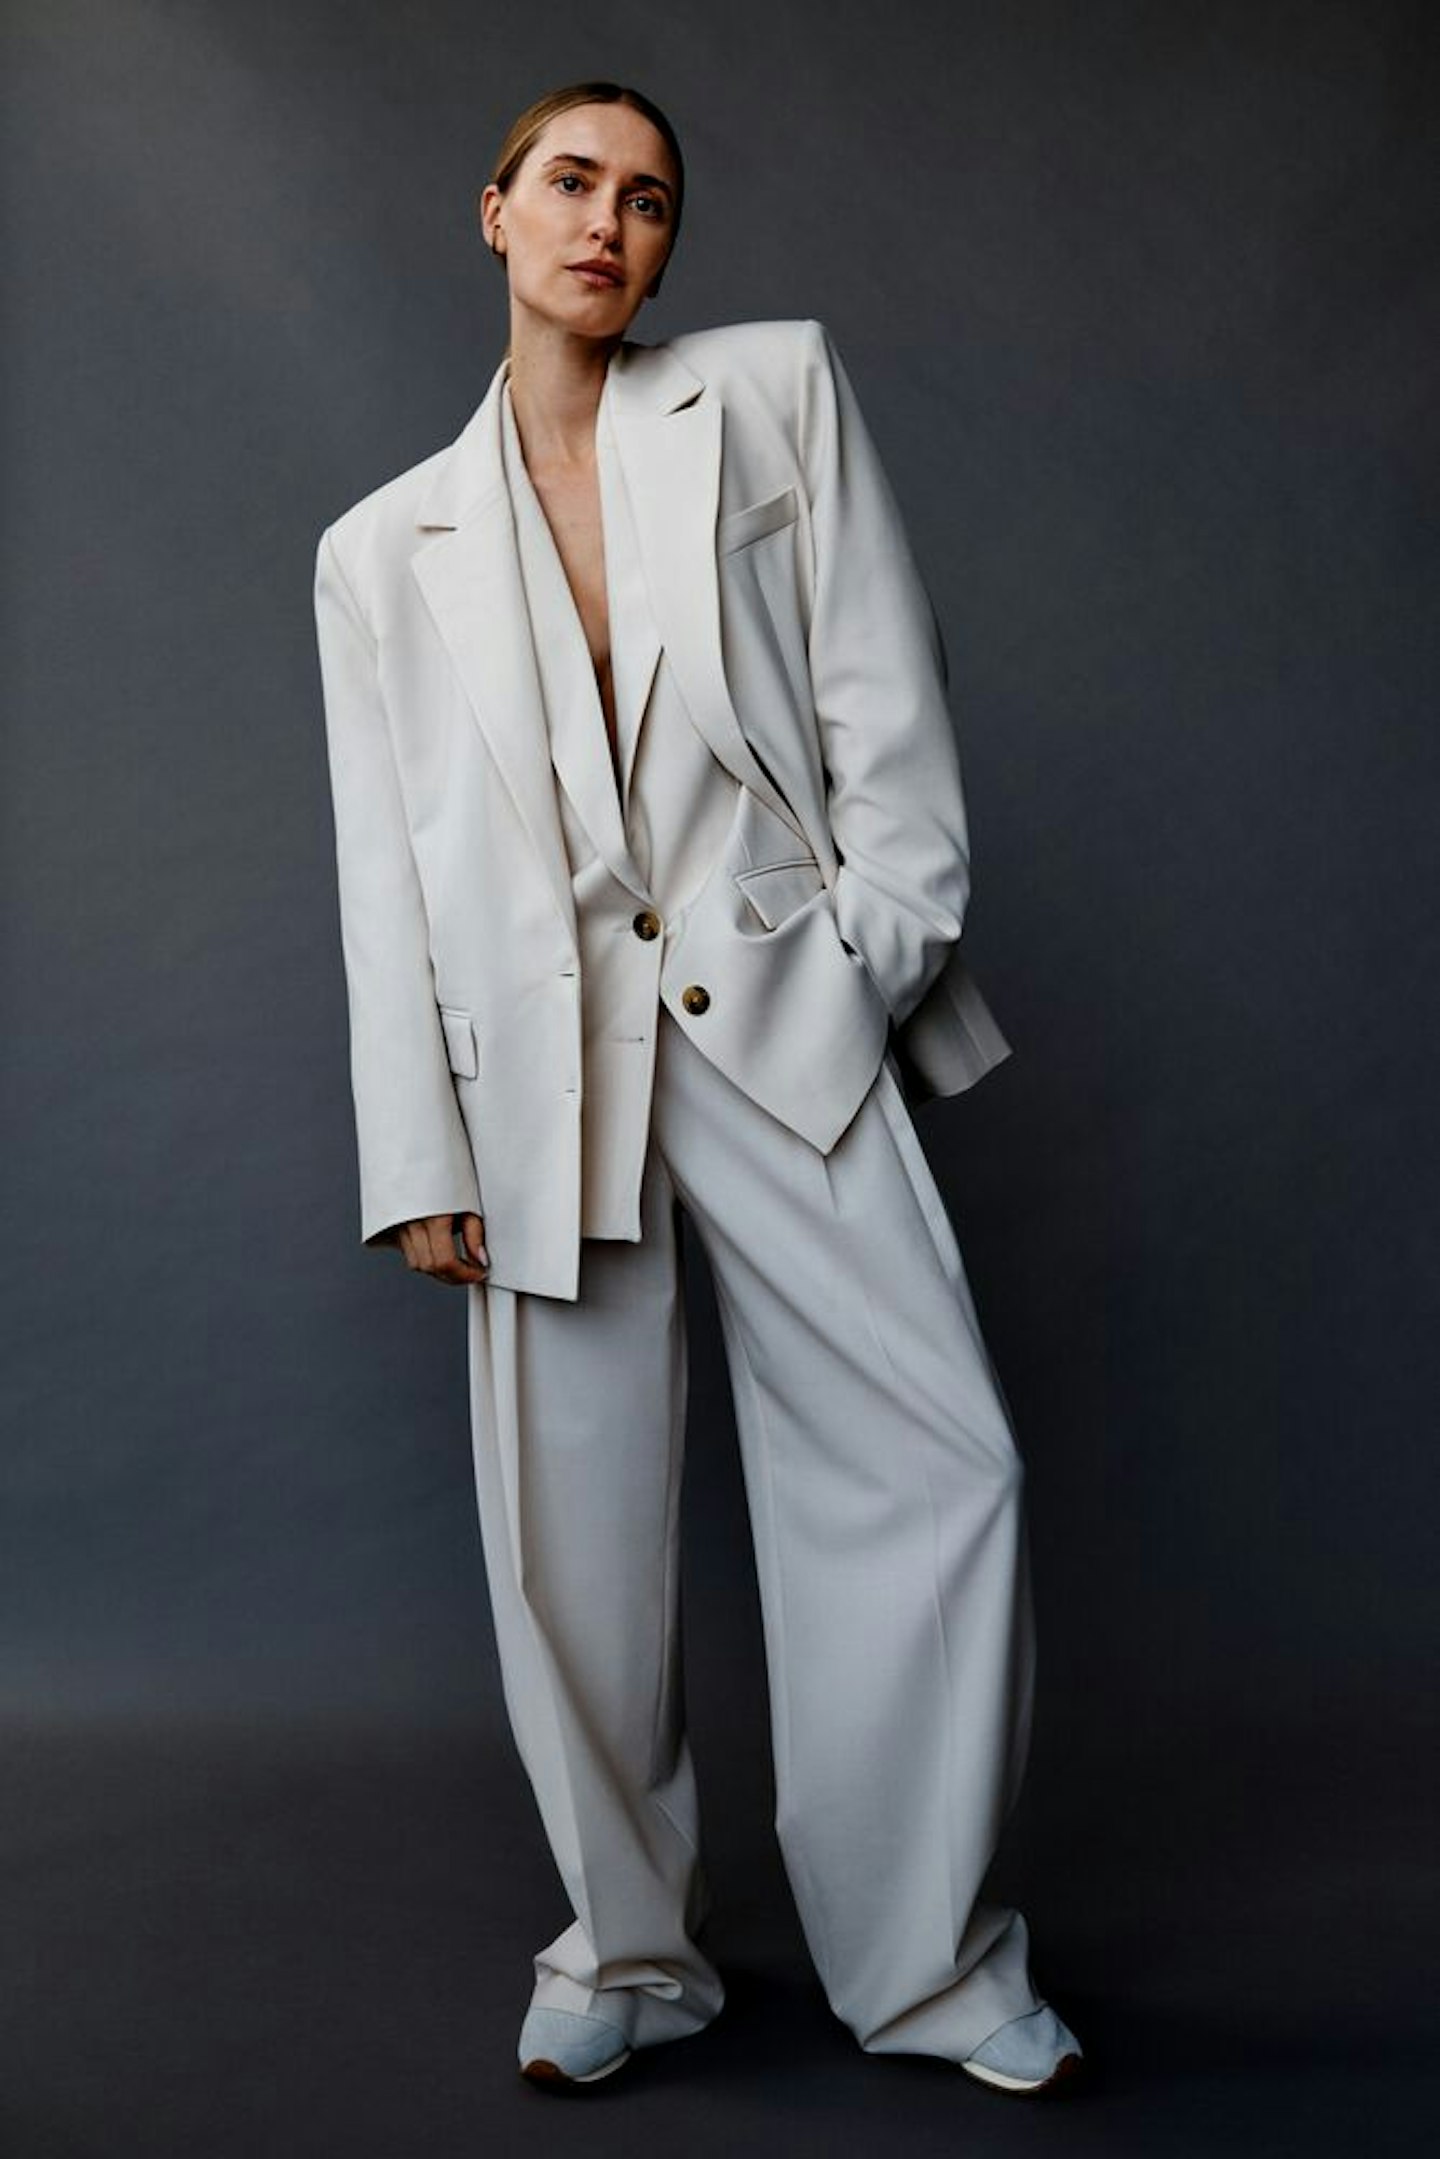 Pernille Teisbaek wearing her new collection for Mango